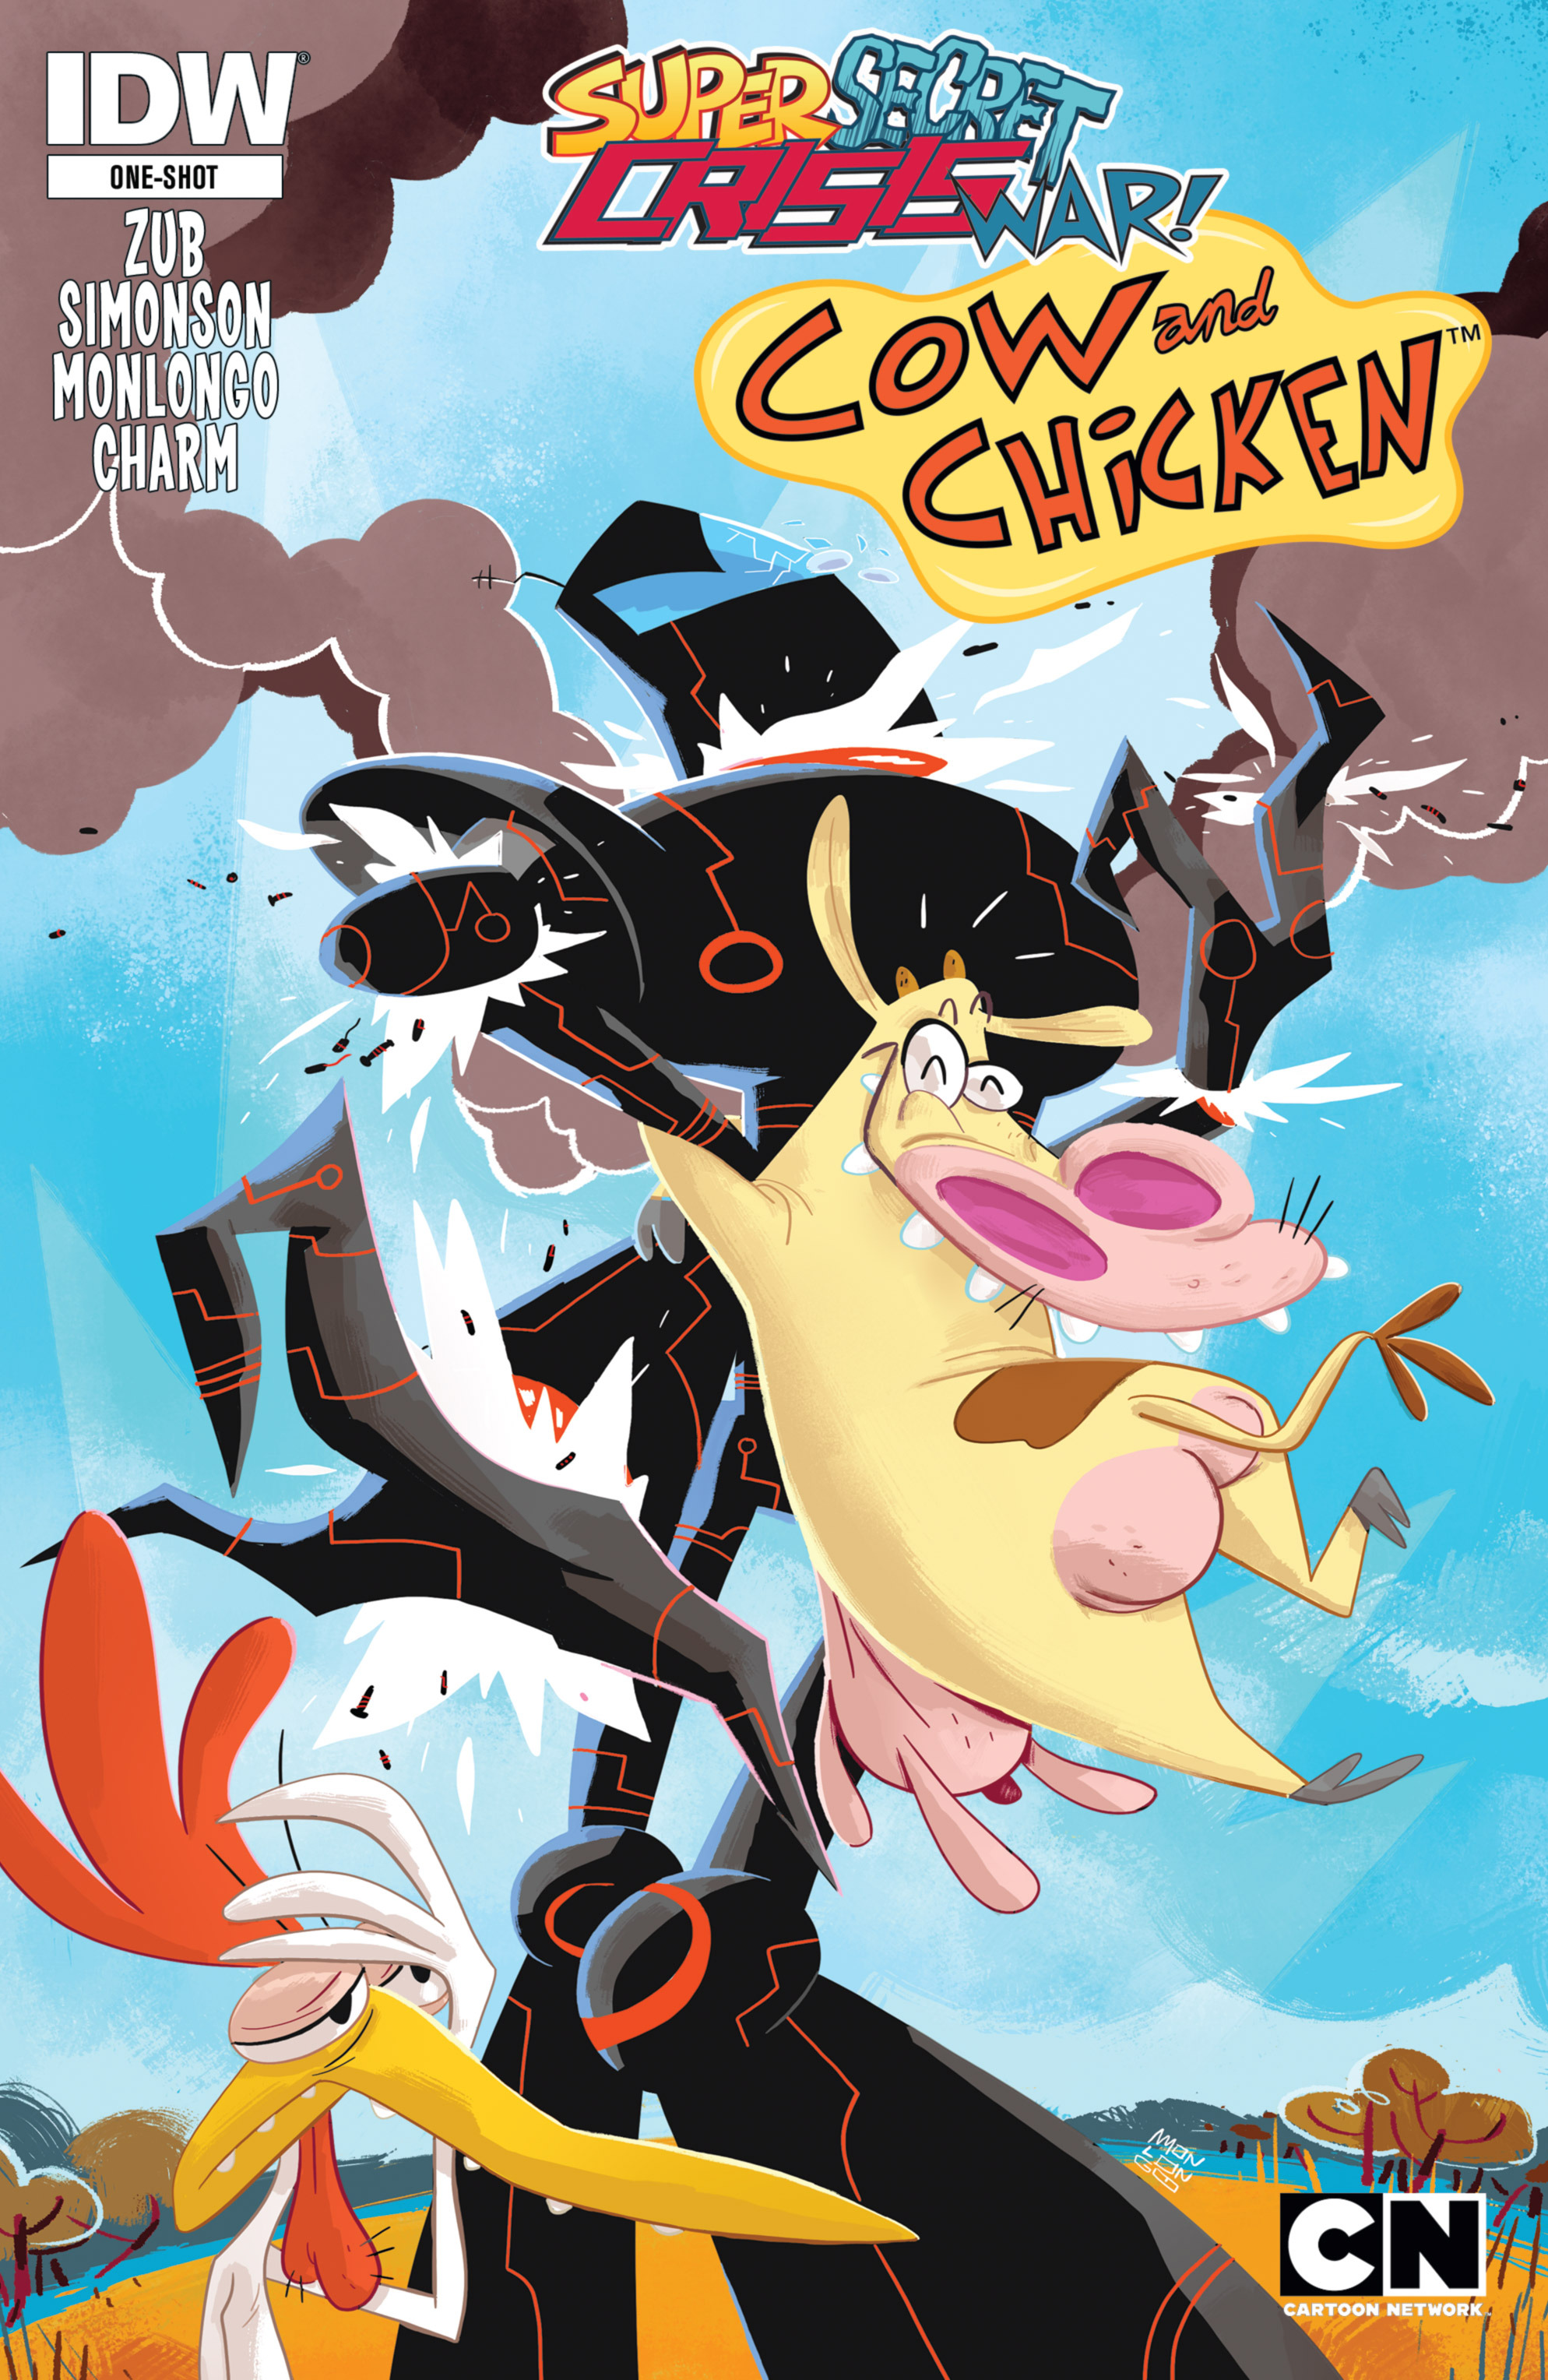 Super Secret Crisis War! issue Special - Cow and Chicken - Page 1